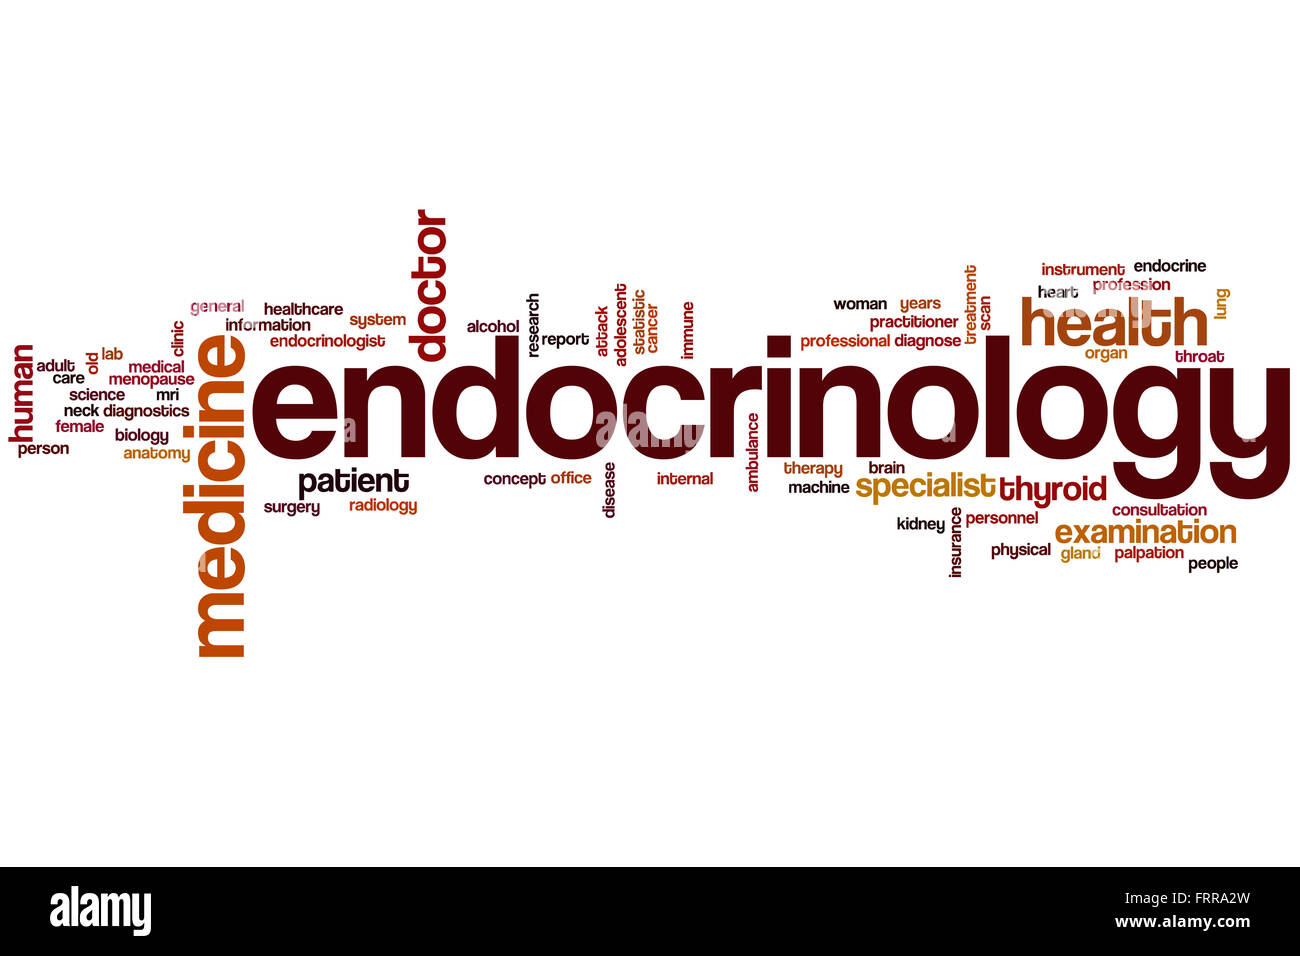 Endocrinology word cloud concept Stock Photo